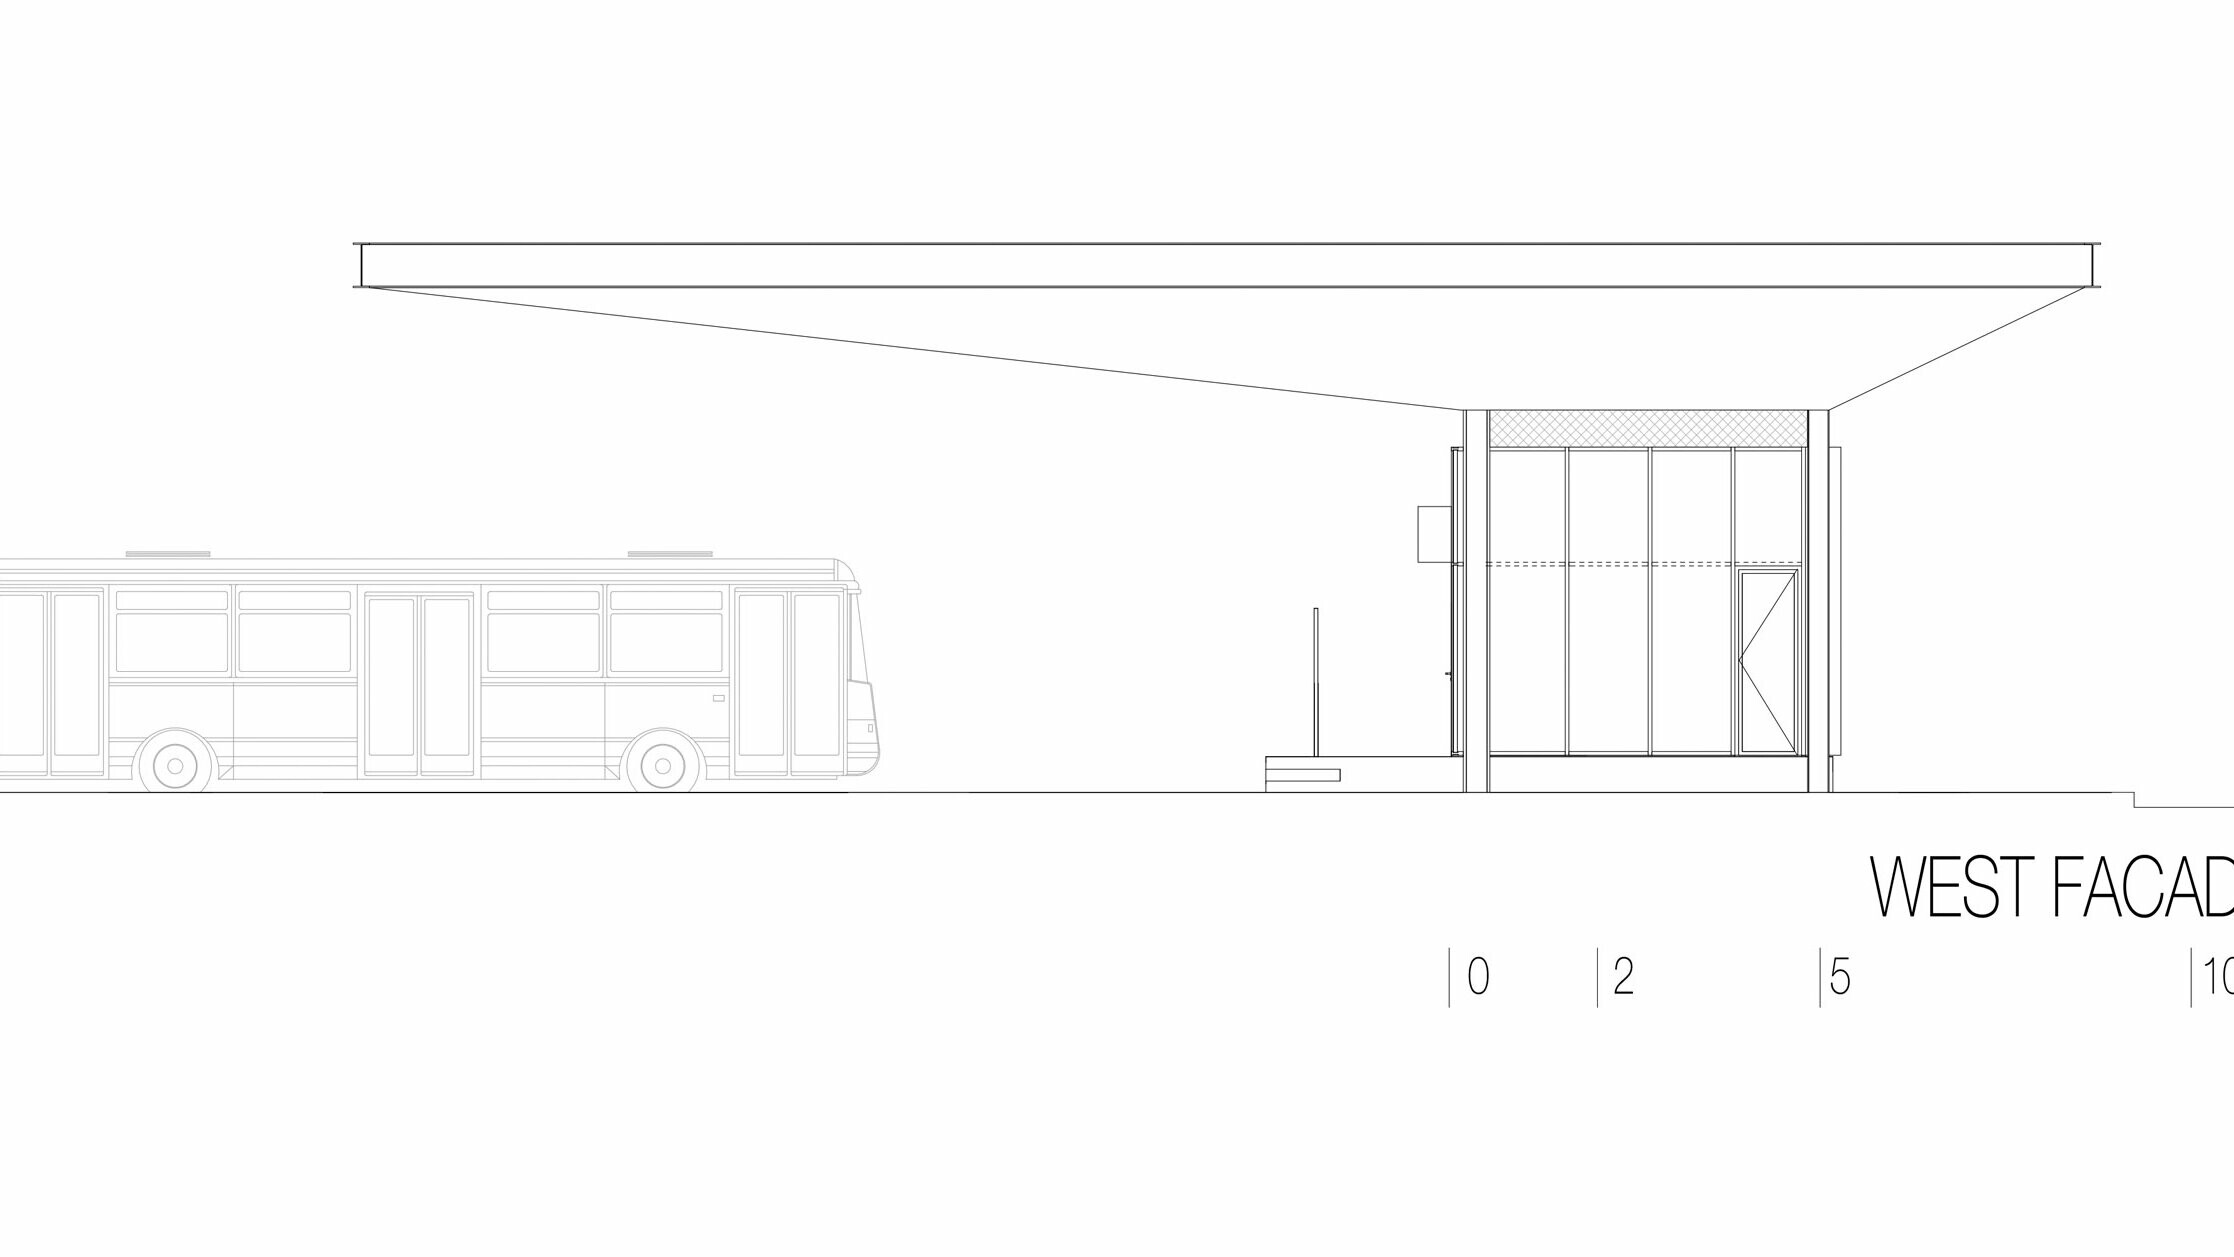 The drawing shows the west view of the "Autobusni Kolodvor Slavonski Brod" bus stop in Croatia. The illustration emphasises the long, horizontal white PREFA Prefalz roof, which protrudes over the area below. On the right of the drawing is a rectangular building with large glass surfaces and clear lines. On the left is a bus, which emphasises the proportions of the bus stop in relation to a vehicle. The western view emphasises the modern and functional architecture of the bus stop, which creates a bright and inviting atmosphere through the combination of glass and aluminium.